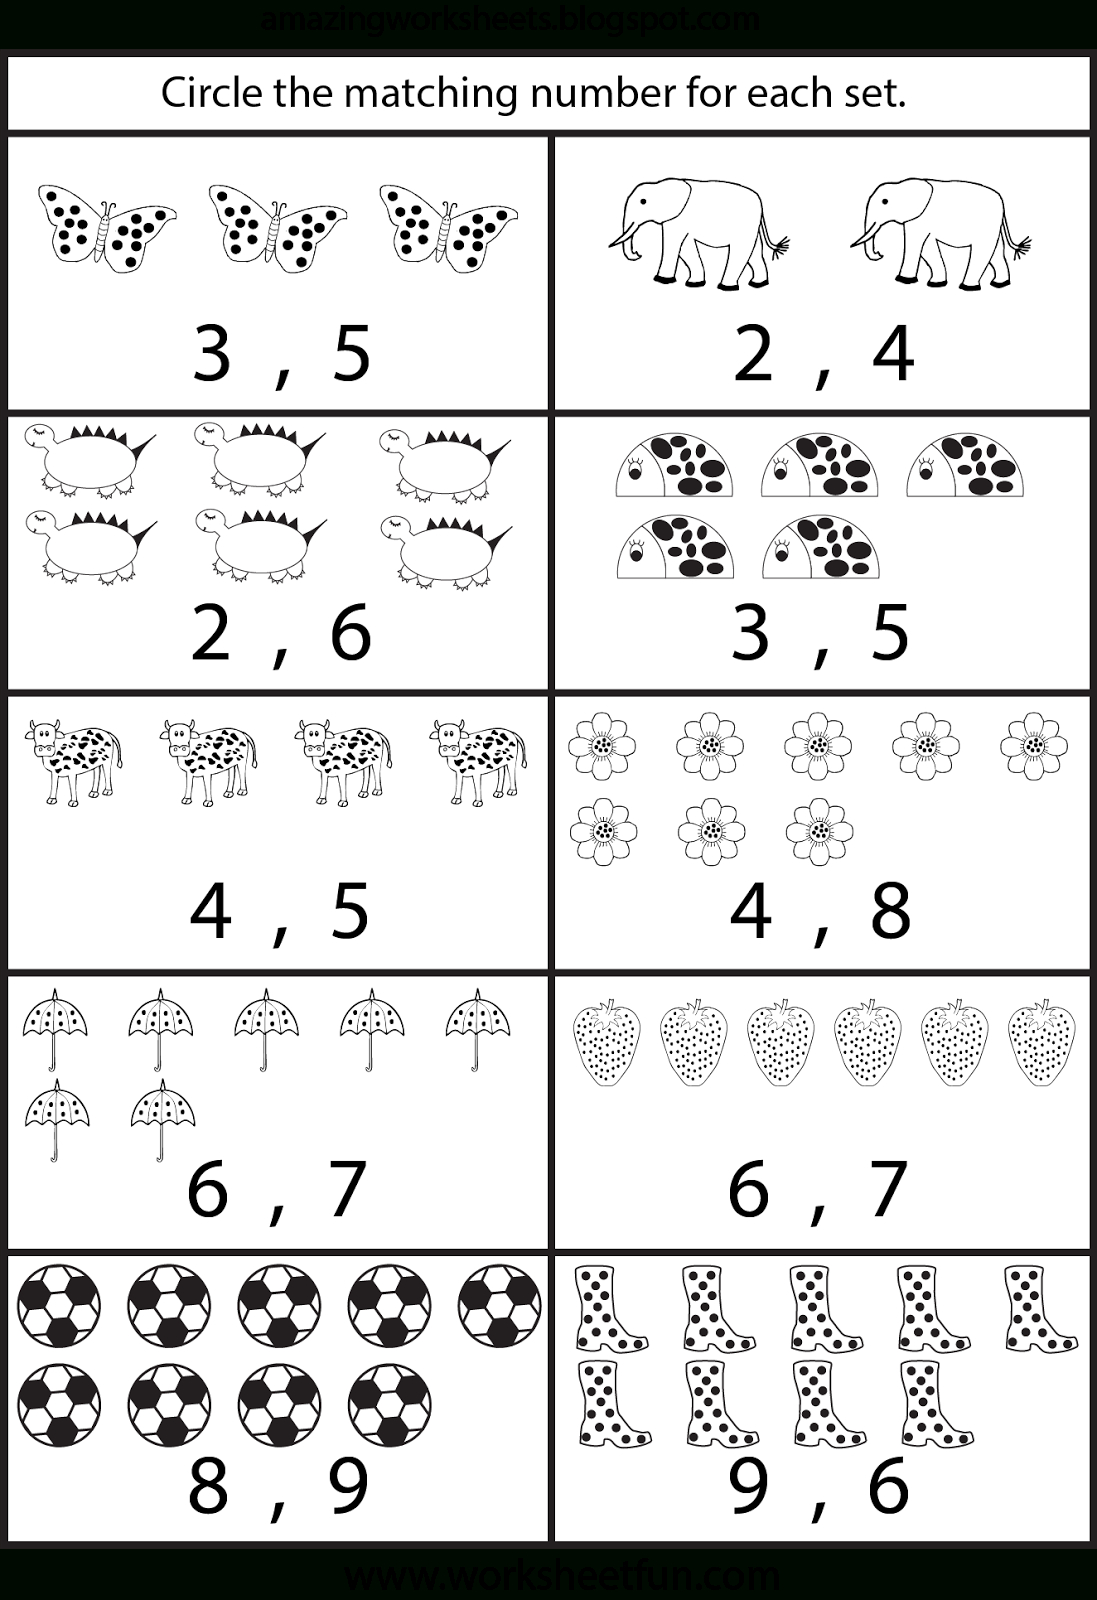 counting-worksheets-1-20-db-excel